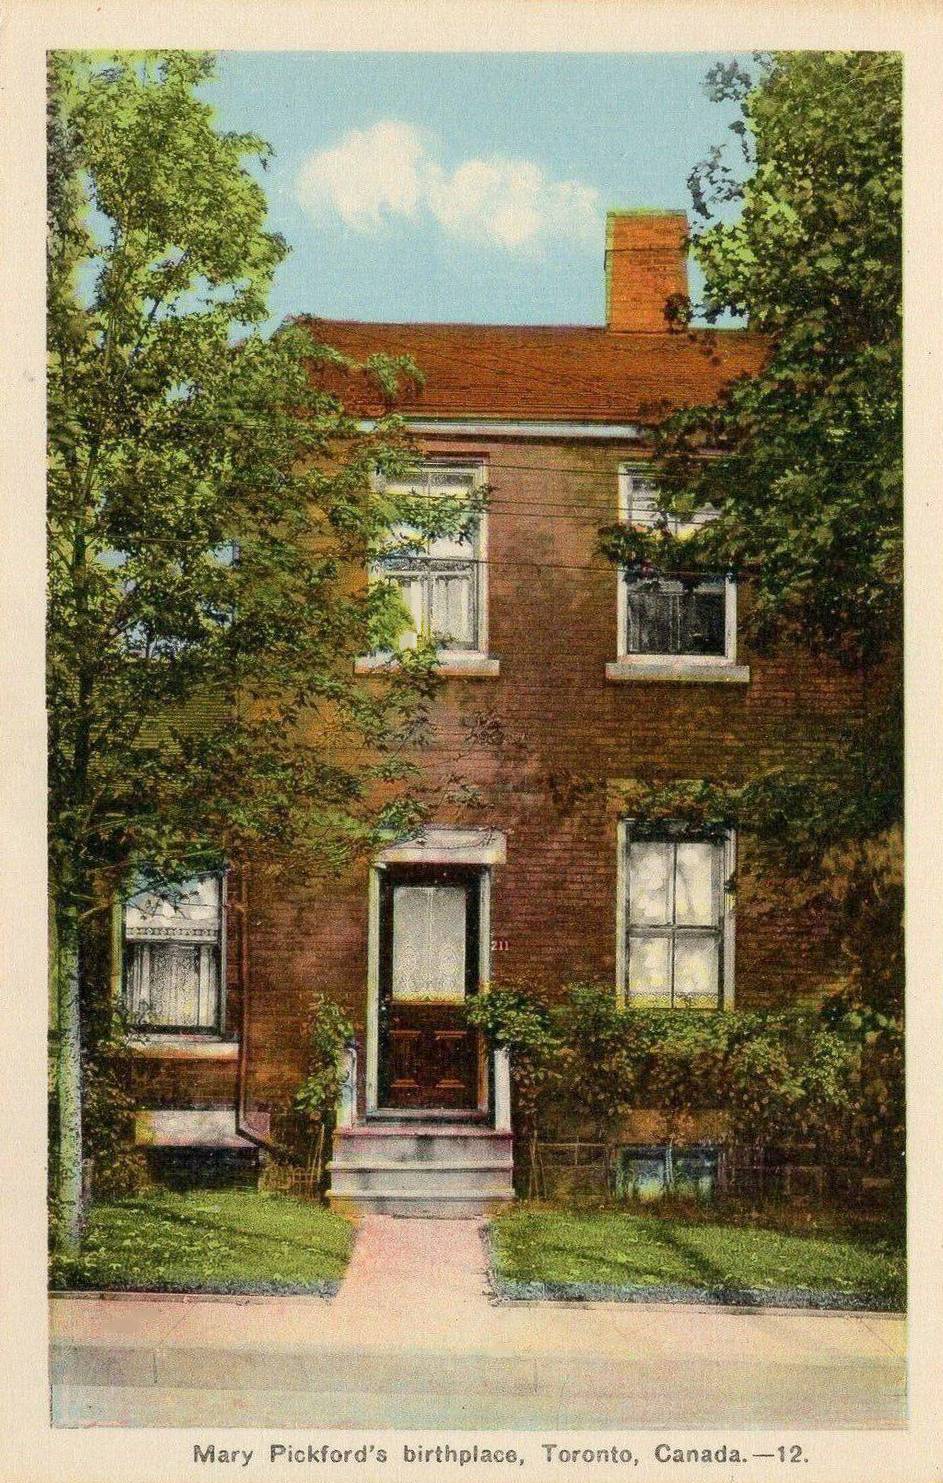 A POSTCARD - TORONTO - MARY PICKKFORD'S TORONTO HOME (BEFORE SHE LEFT) - 211 UNIVERSITY AVE - BEFORE UNIVERSITY AVE WAS WIDENED - TINTED - NICE VERSION - c LATE 1920s